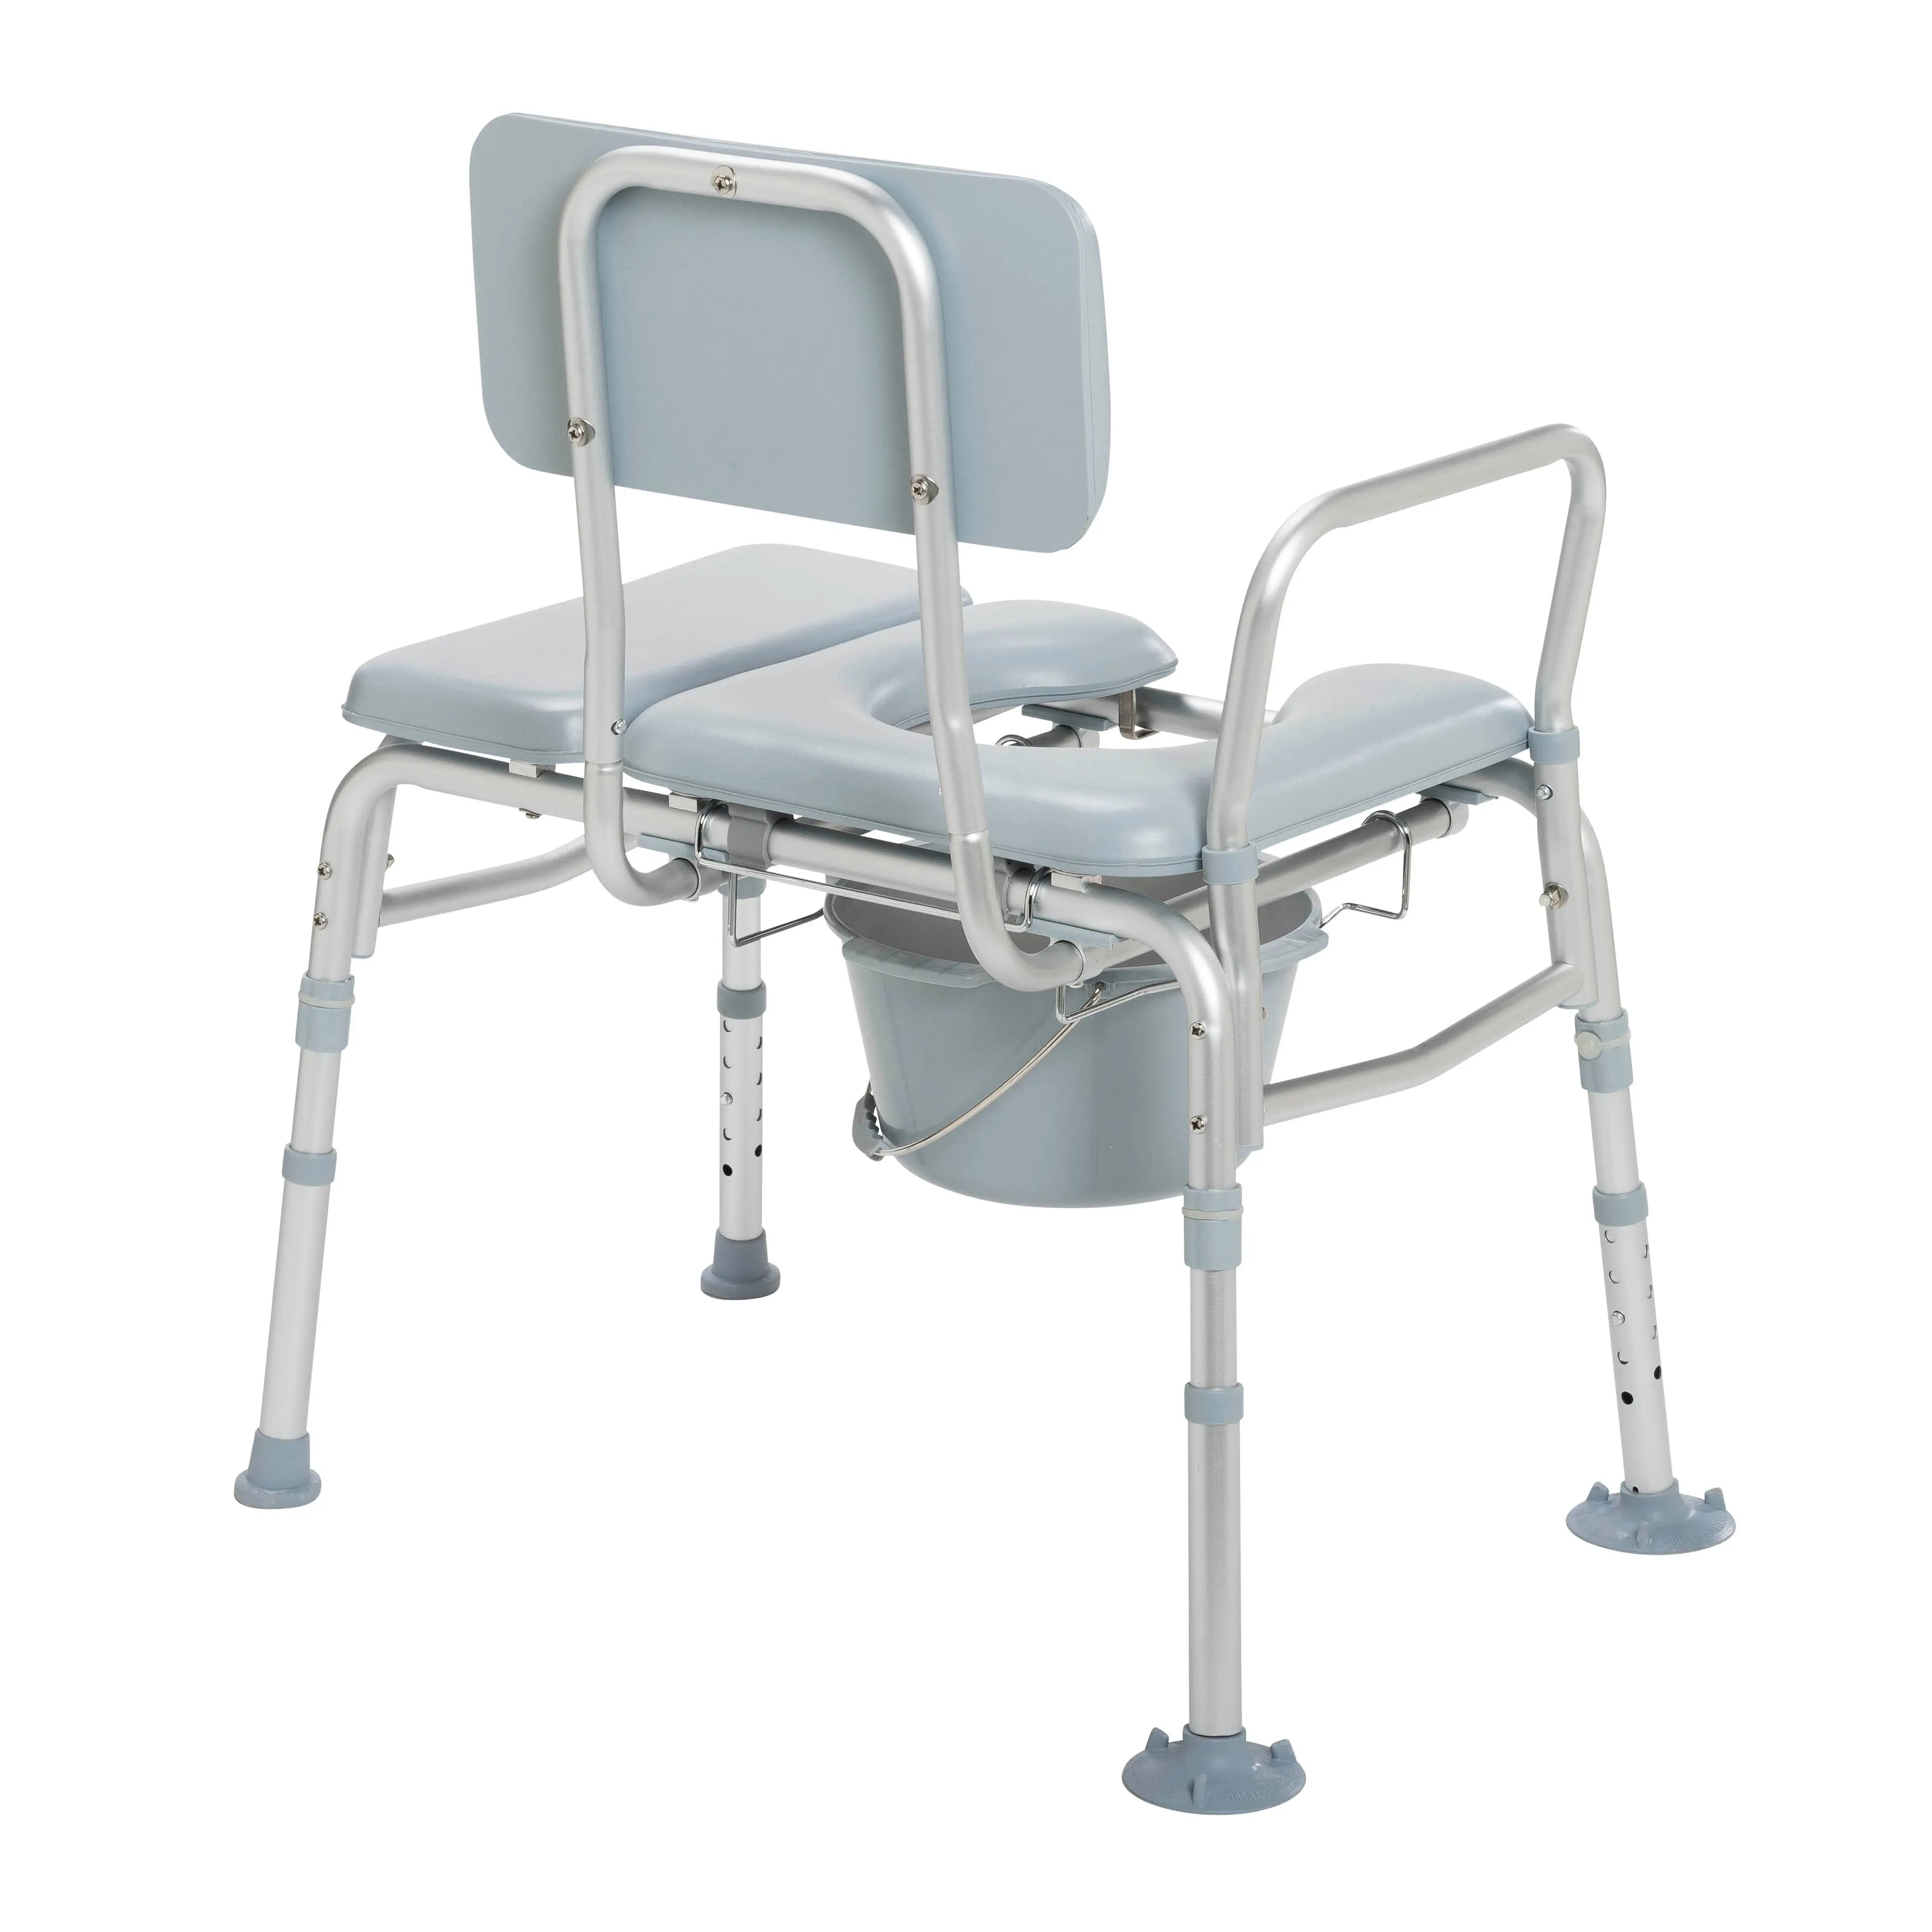 Padded Seat Transfer Bench with Commode Opening - Home Health Store Inc